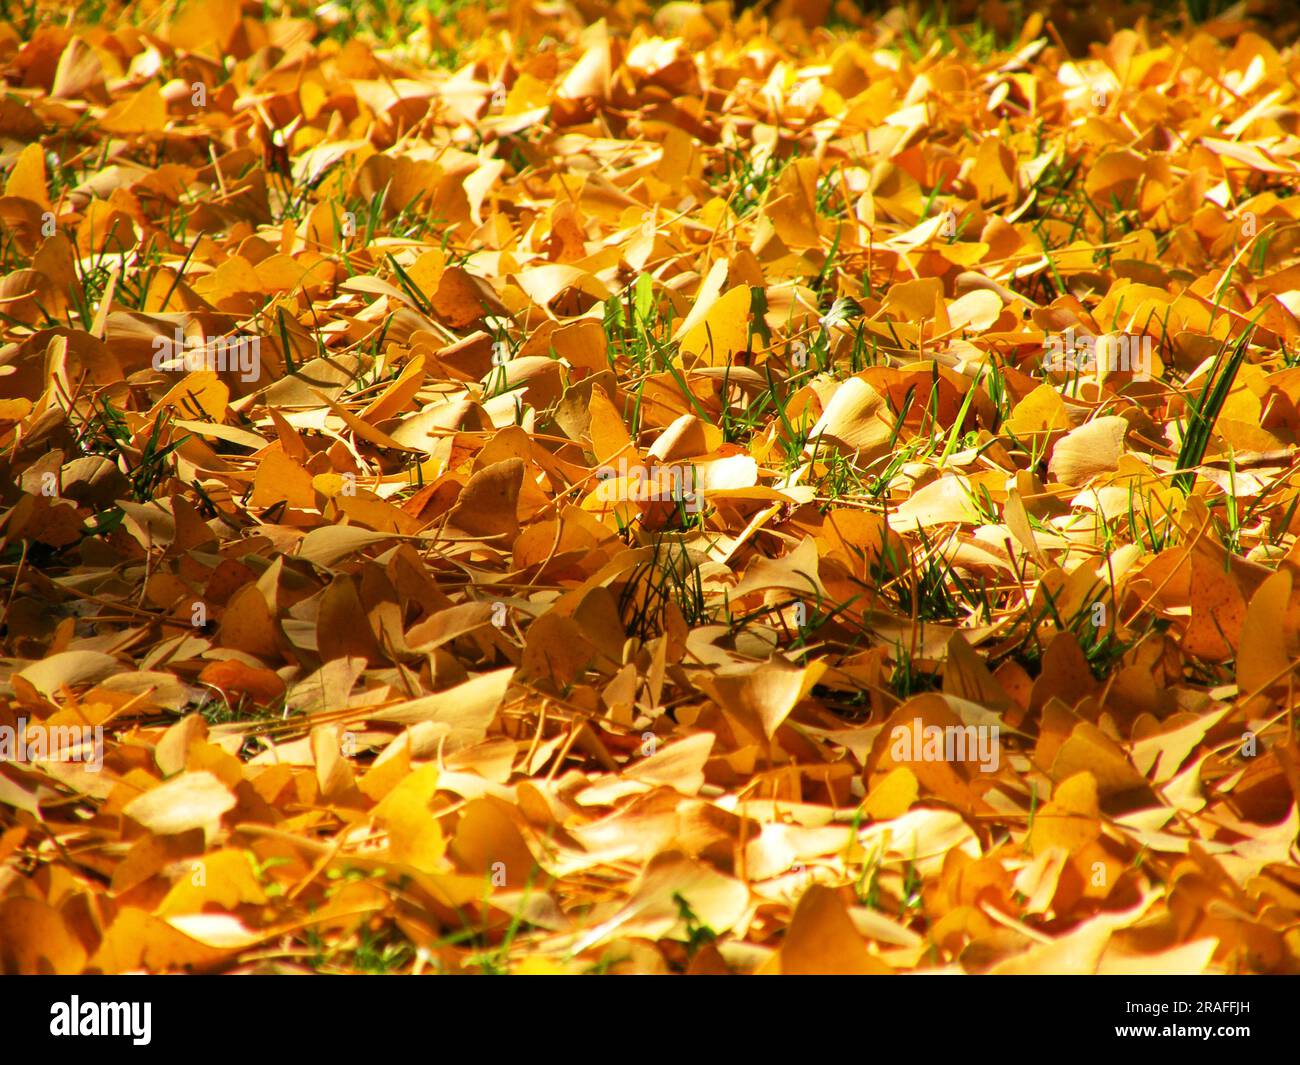 A blanket of yellow leaves fallen in autumn Stock Photo